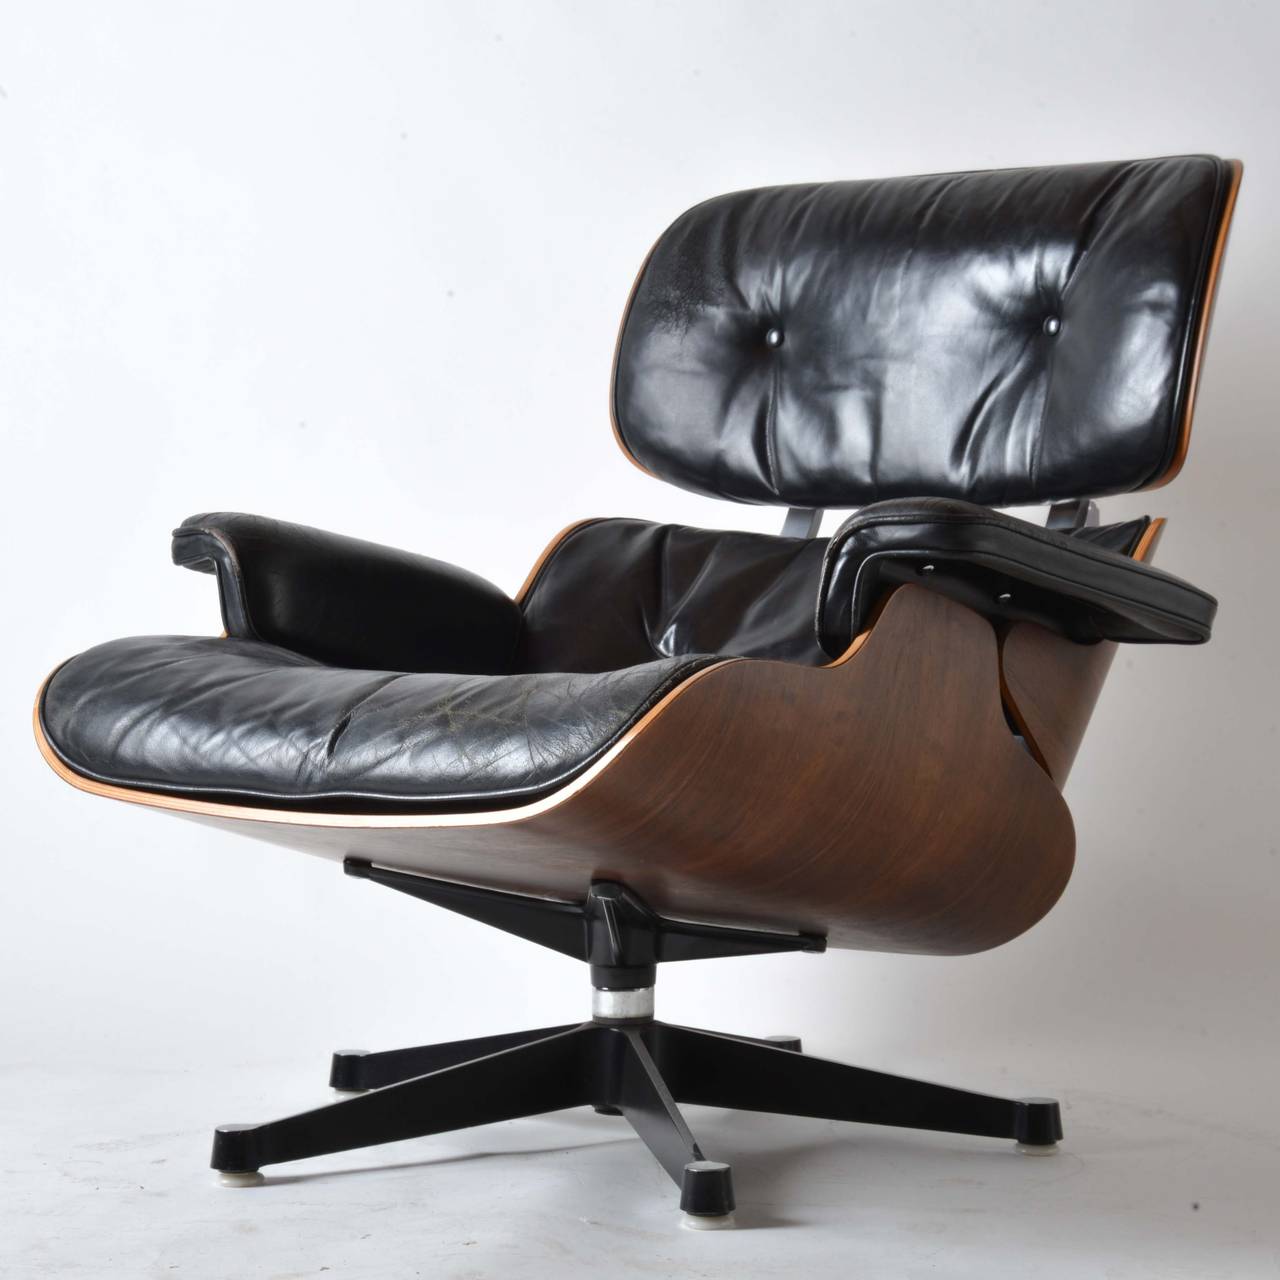 Iconic Eames Lounge Chair for Herman Miller In Good Condition For Sale In Oisterwijk, NL